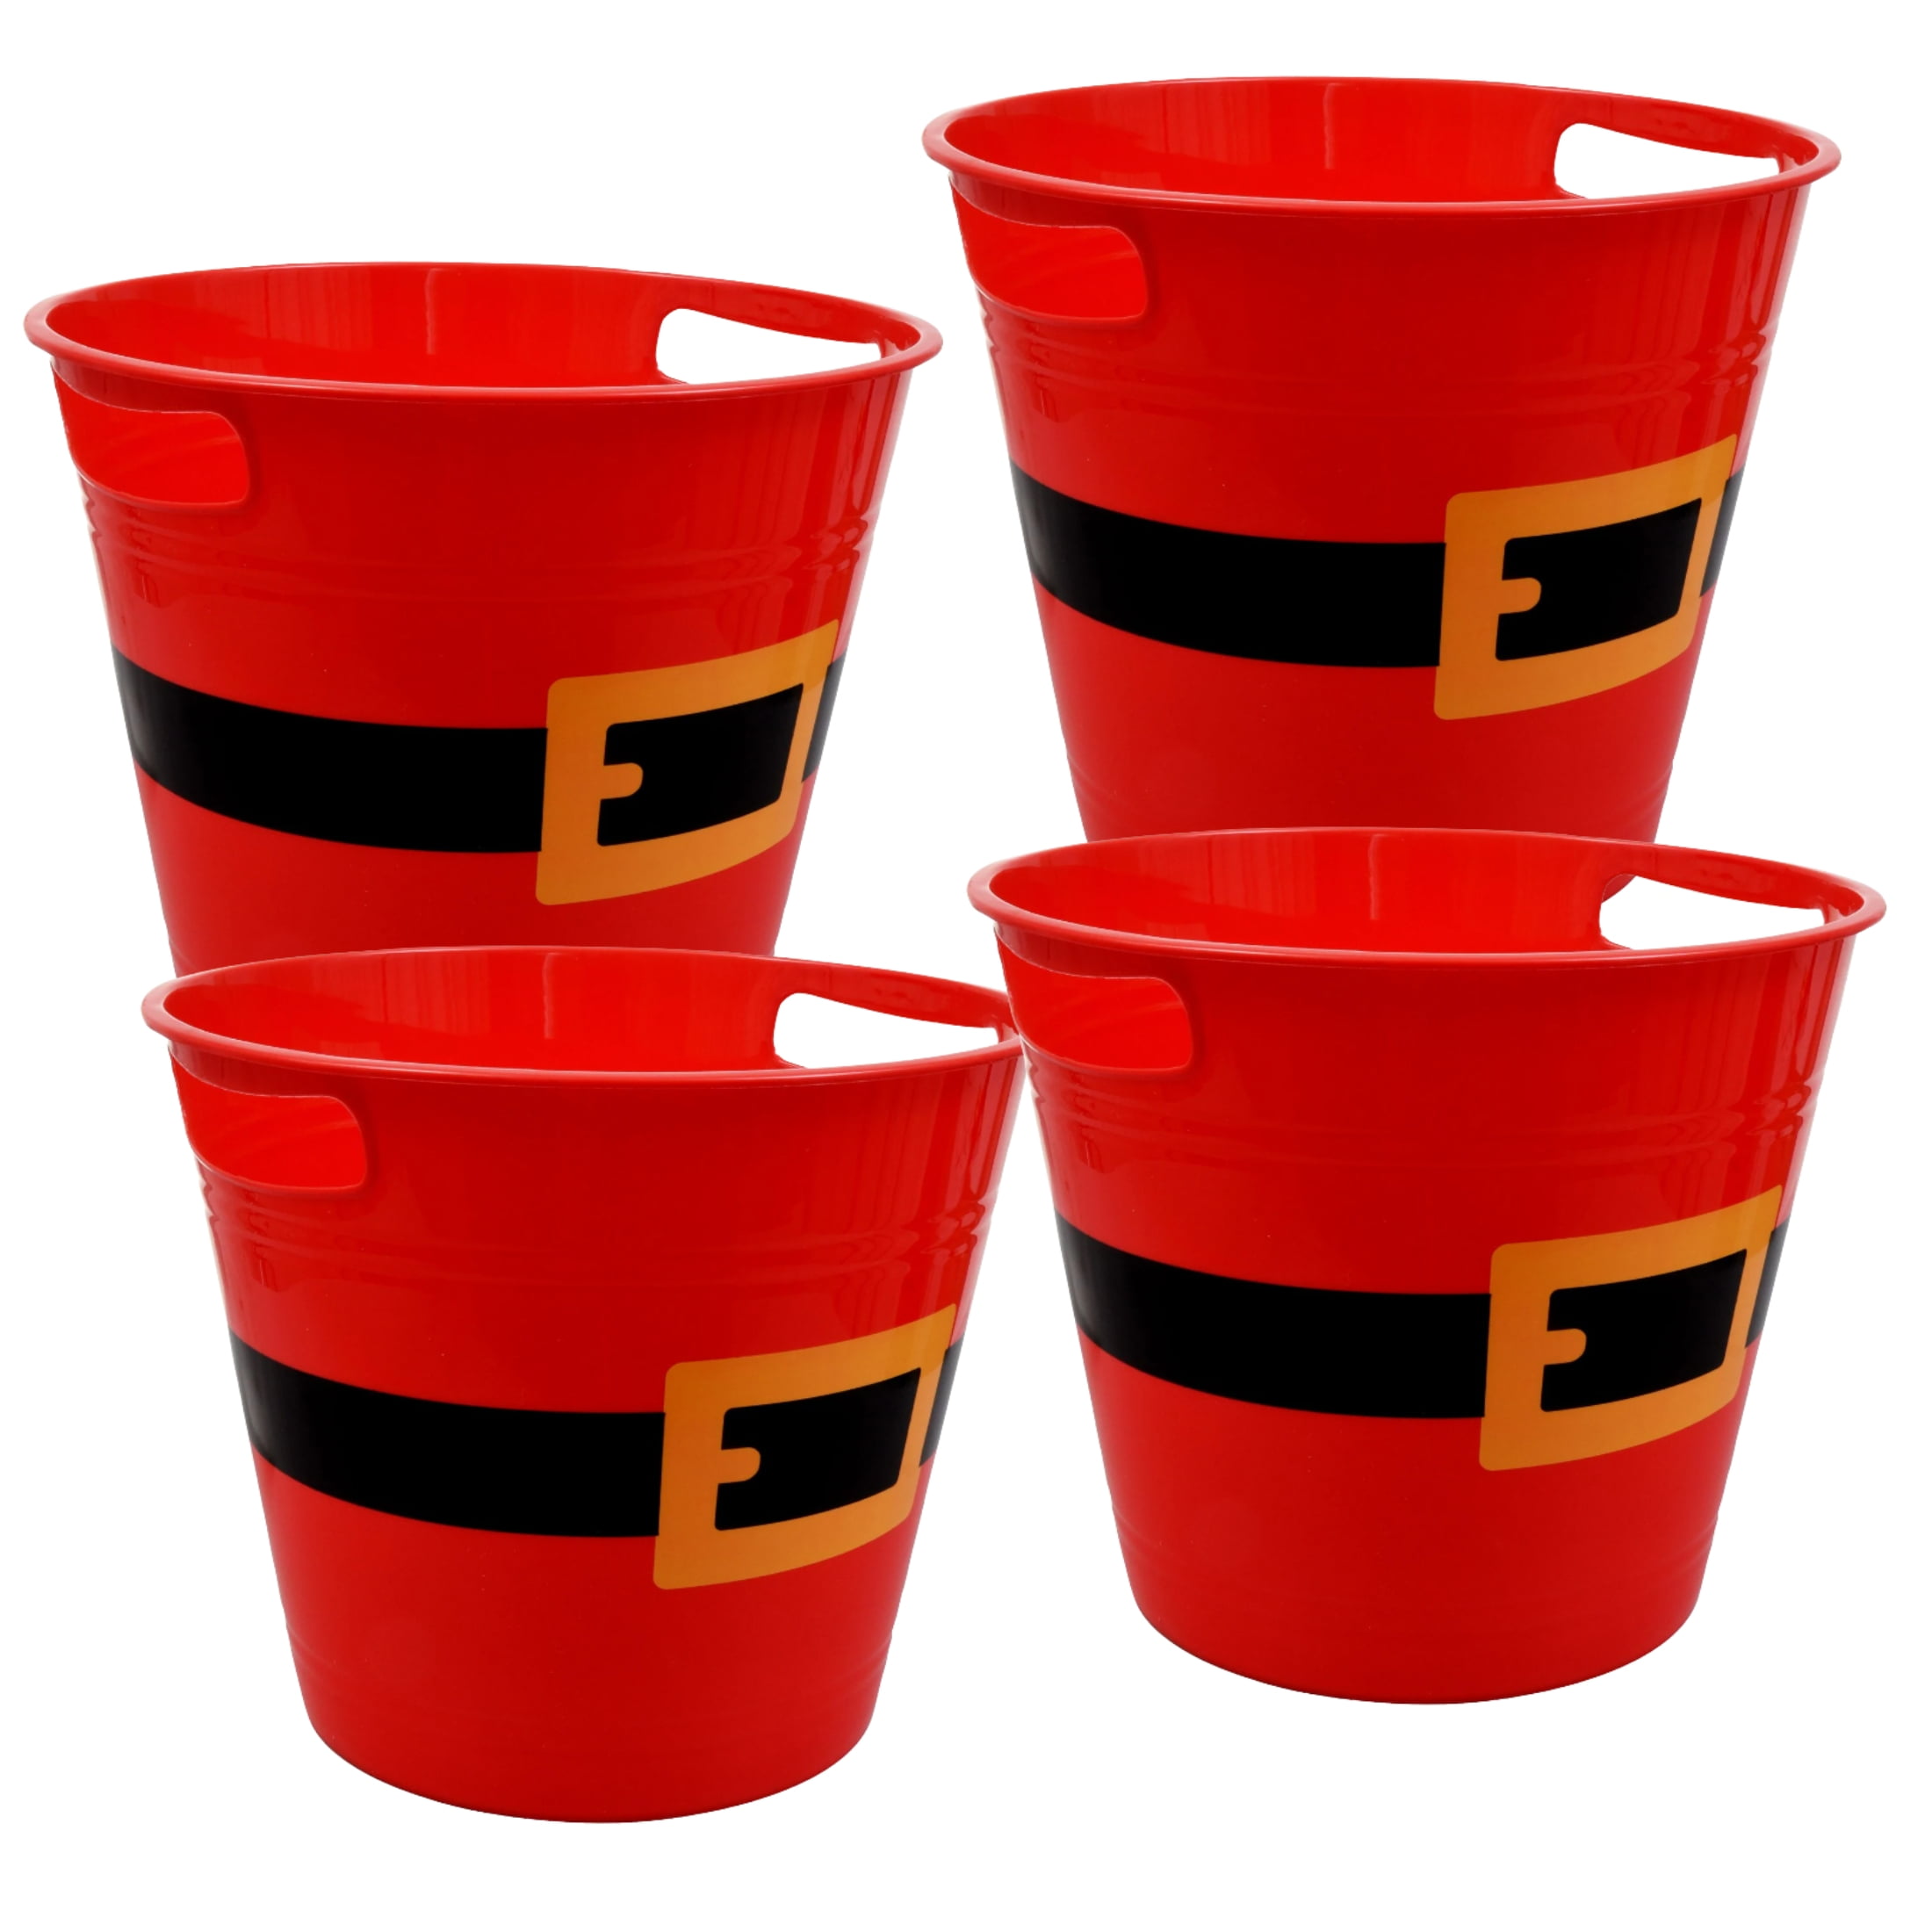 Ja'cor Plastic Buckets with Handles Red Santa Belt Round Basket, Multi-Purpose Container Decorative Kitchen Candy Baskets Christmas Classroom Holiday Party